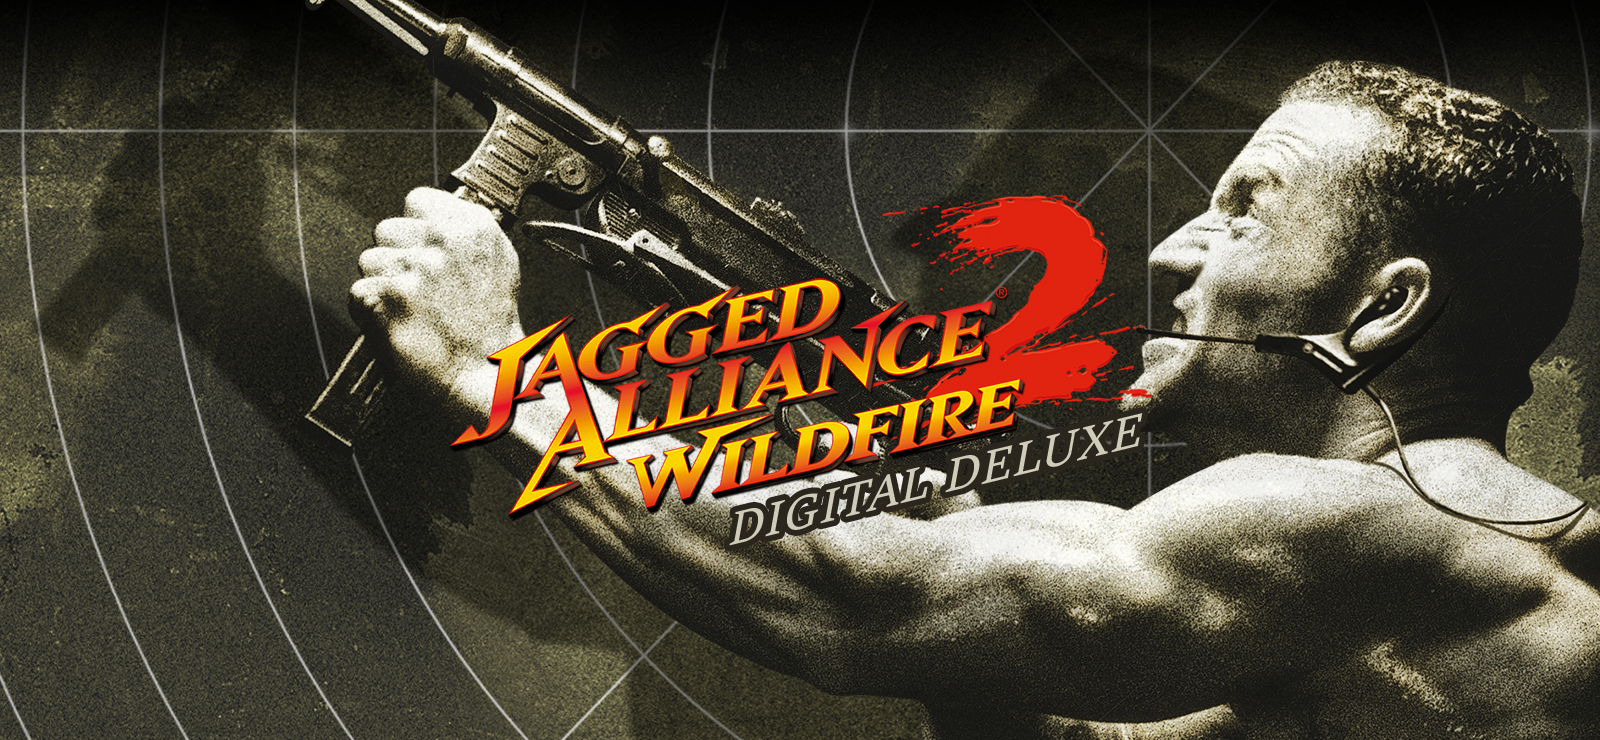 Jagged Alliance 2: Wildfire - Digital Deluxe Content